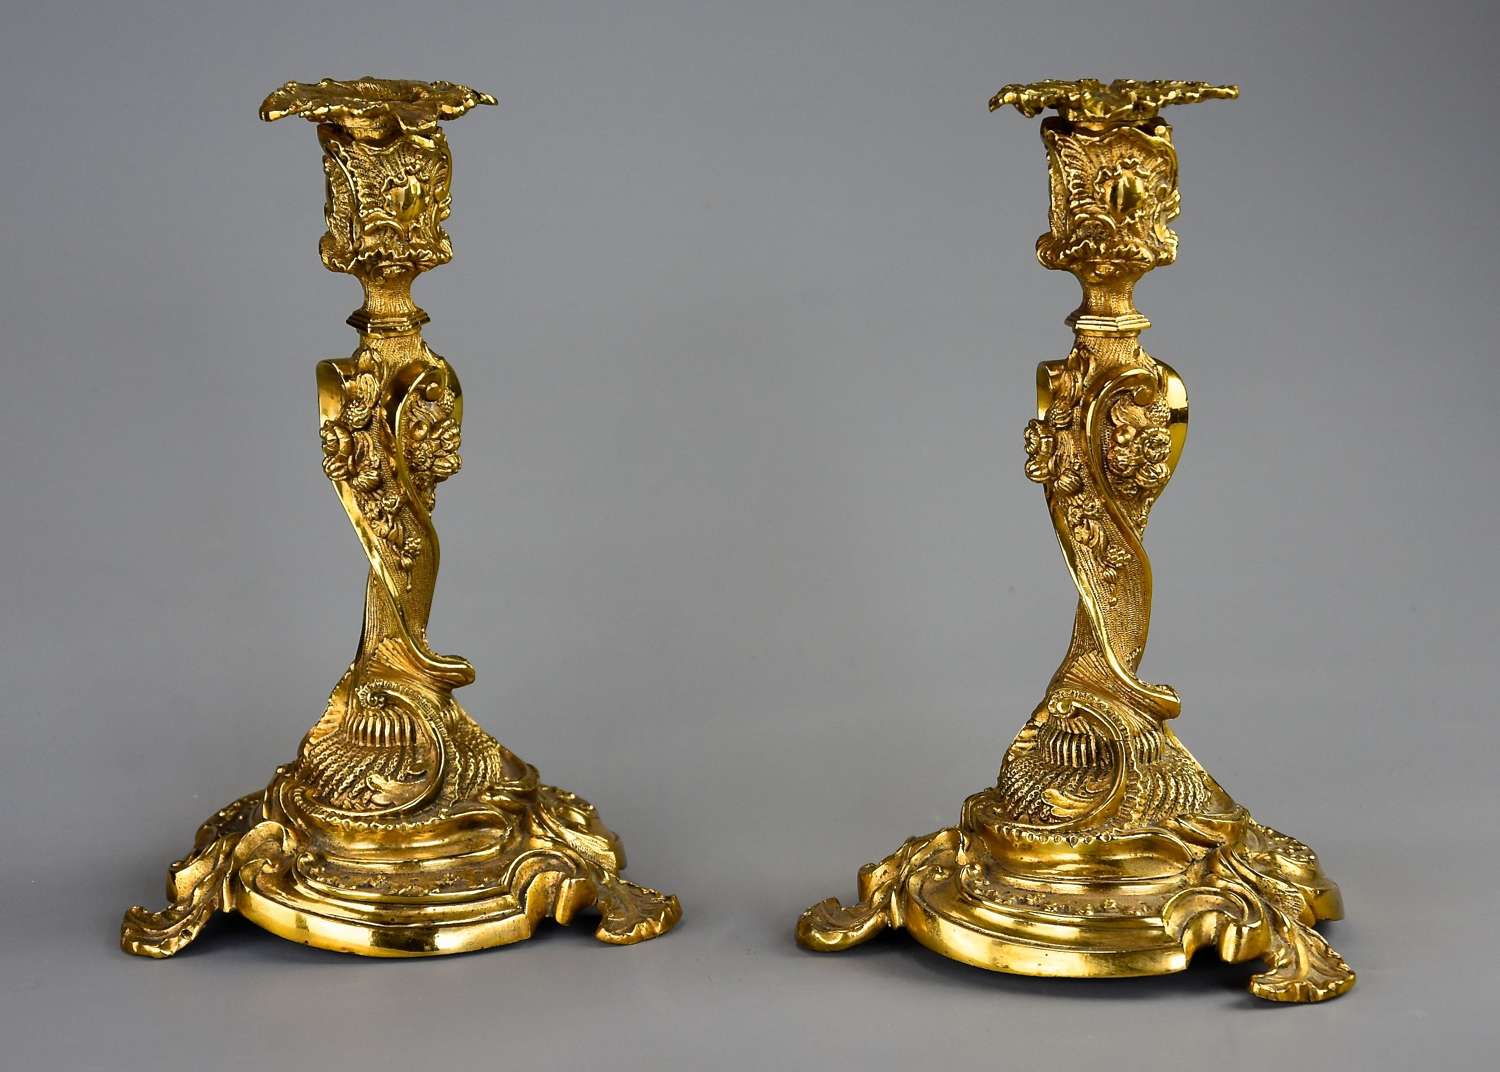 Pair of 19thc French brass candlesticks in the Rococo style